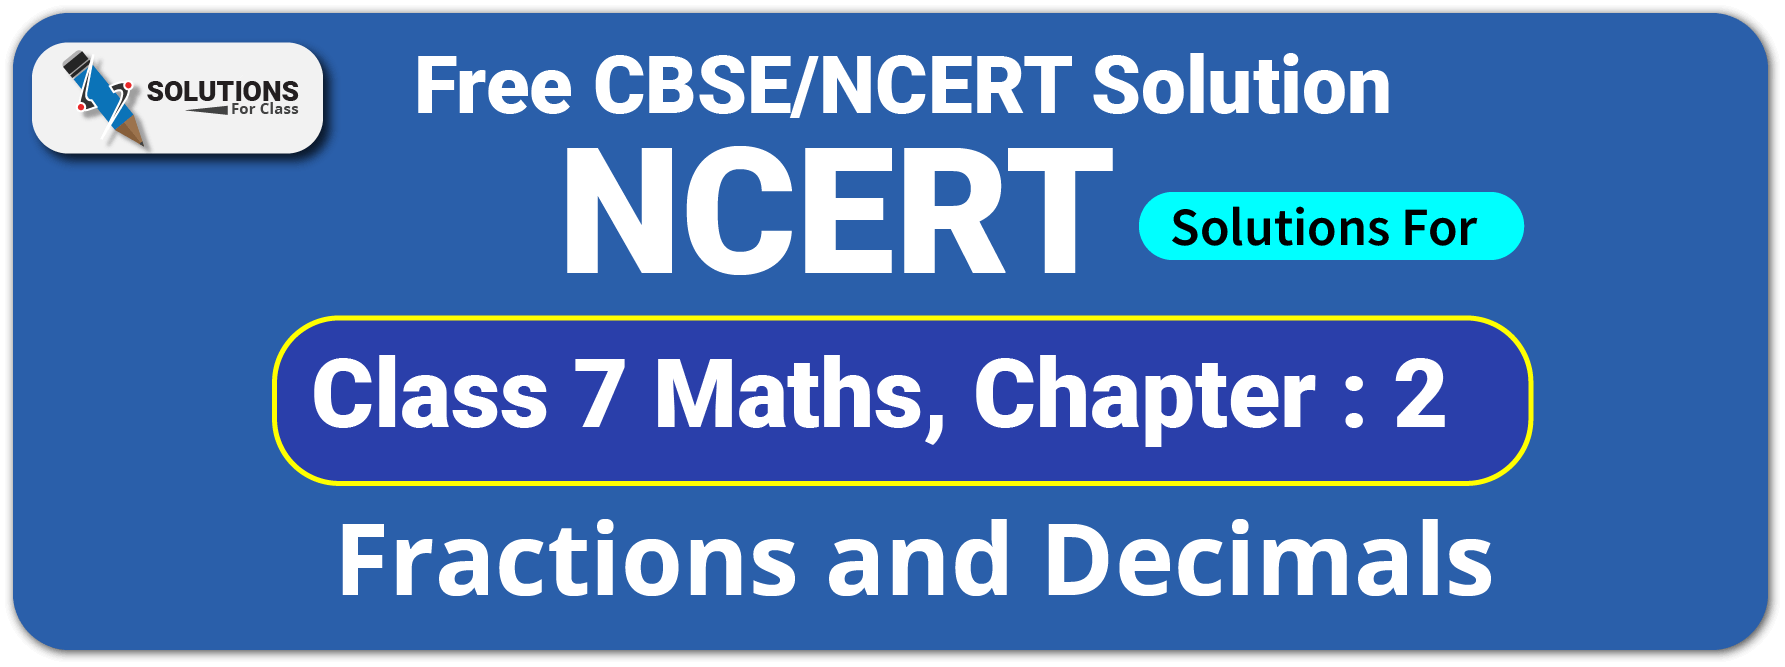 NCERT Solutions For Class 7 Chapter 2, Fractions and Decimals